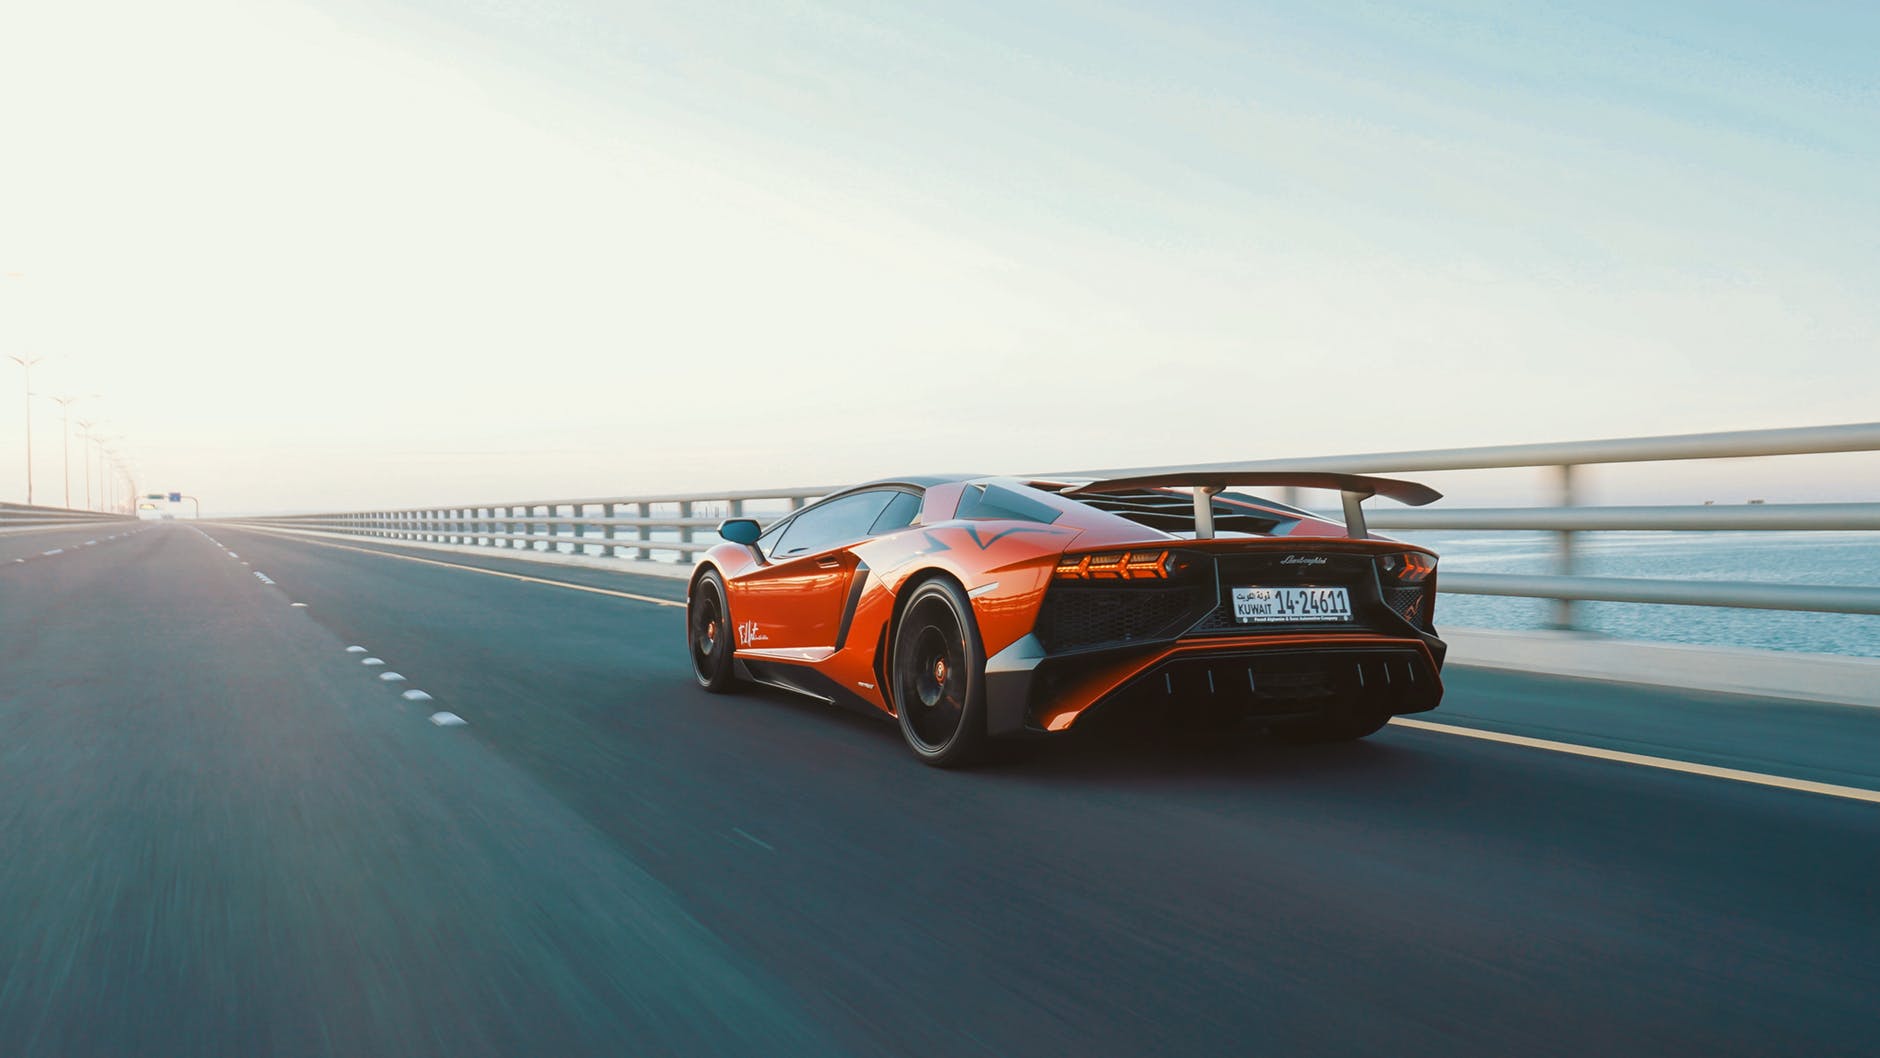 At the Speed of Light: 7 Reasons to Own a Lamborghini